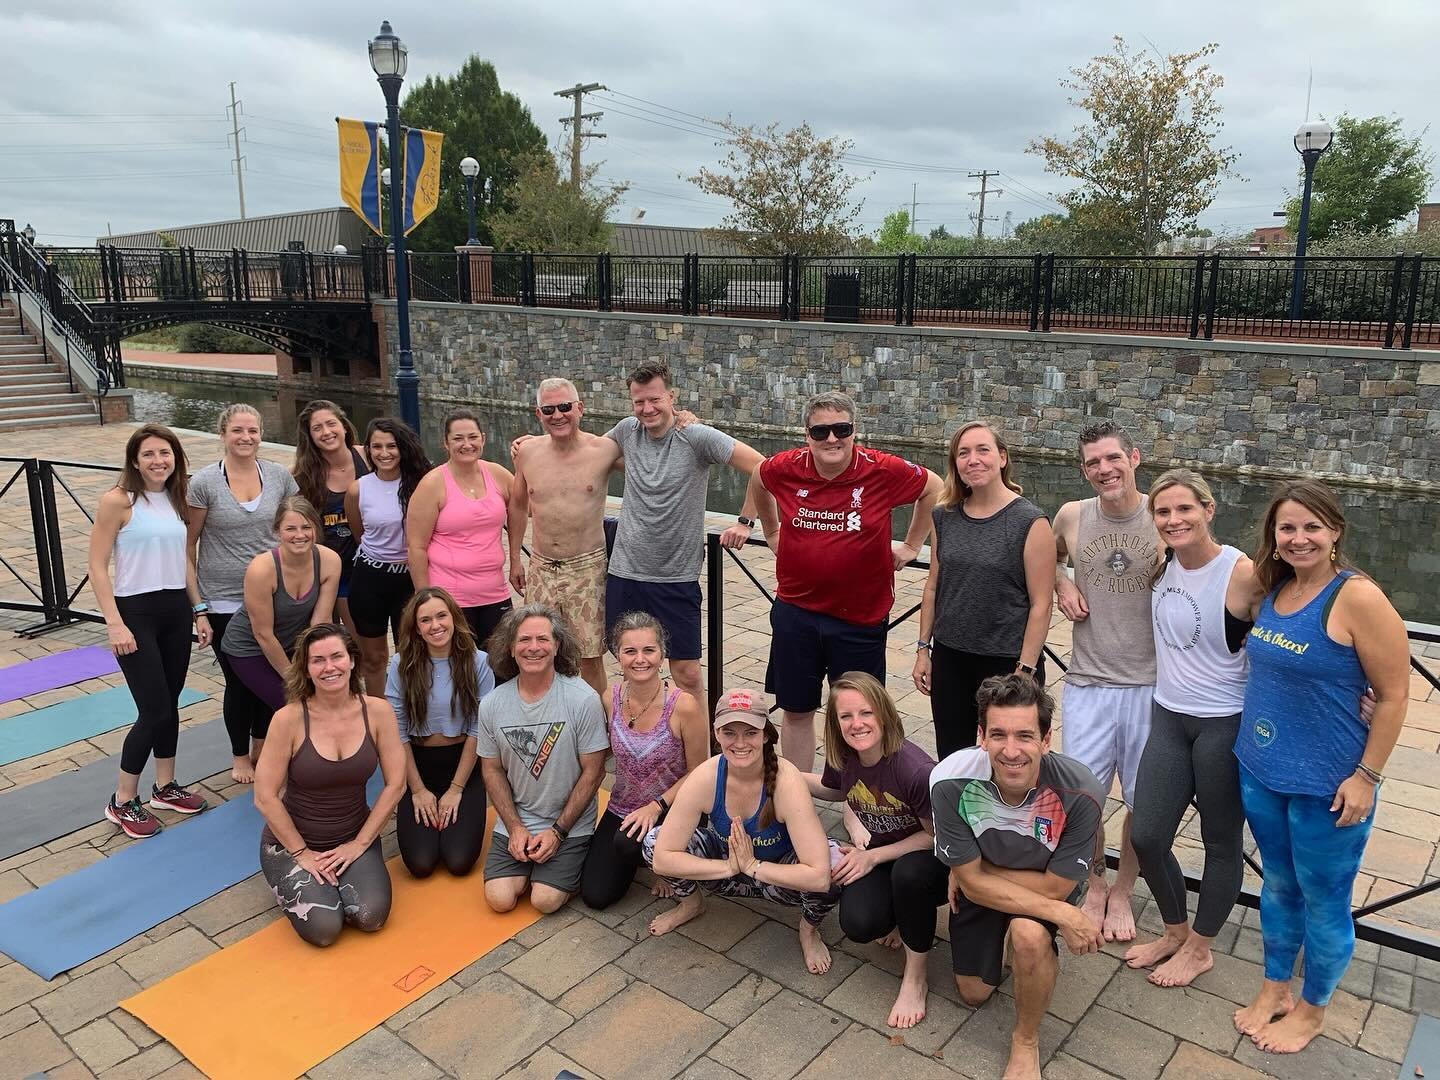 Join us at Idiom Brewing for a classic eat.YOGA.drink Yoga + Beer experience this Saturday, May 11! First, roll out your mat for an invigorating, all-levels vinyasa yoga class. Following, enjoy a refreshing craft beer and great company! Namaste &amp;